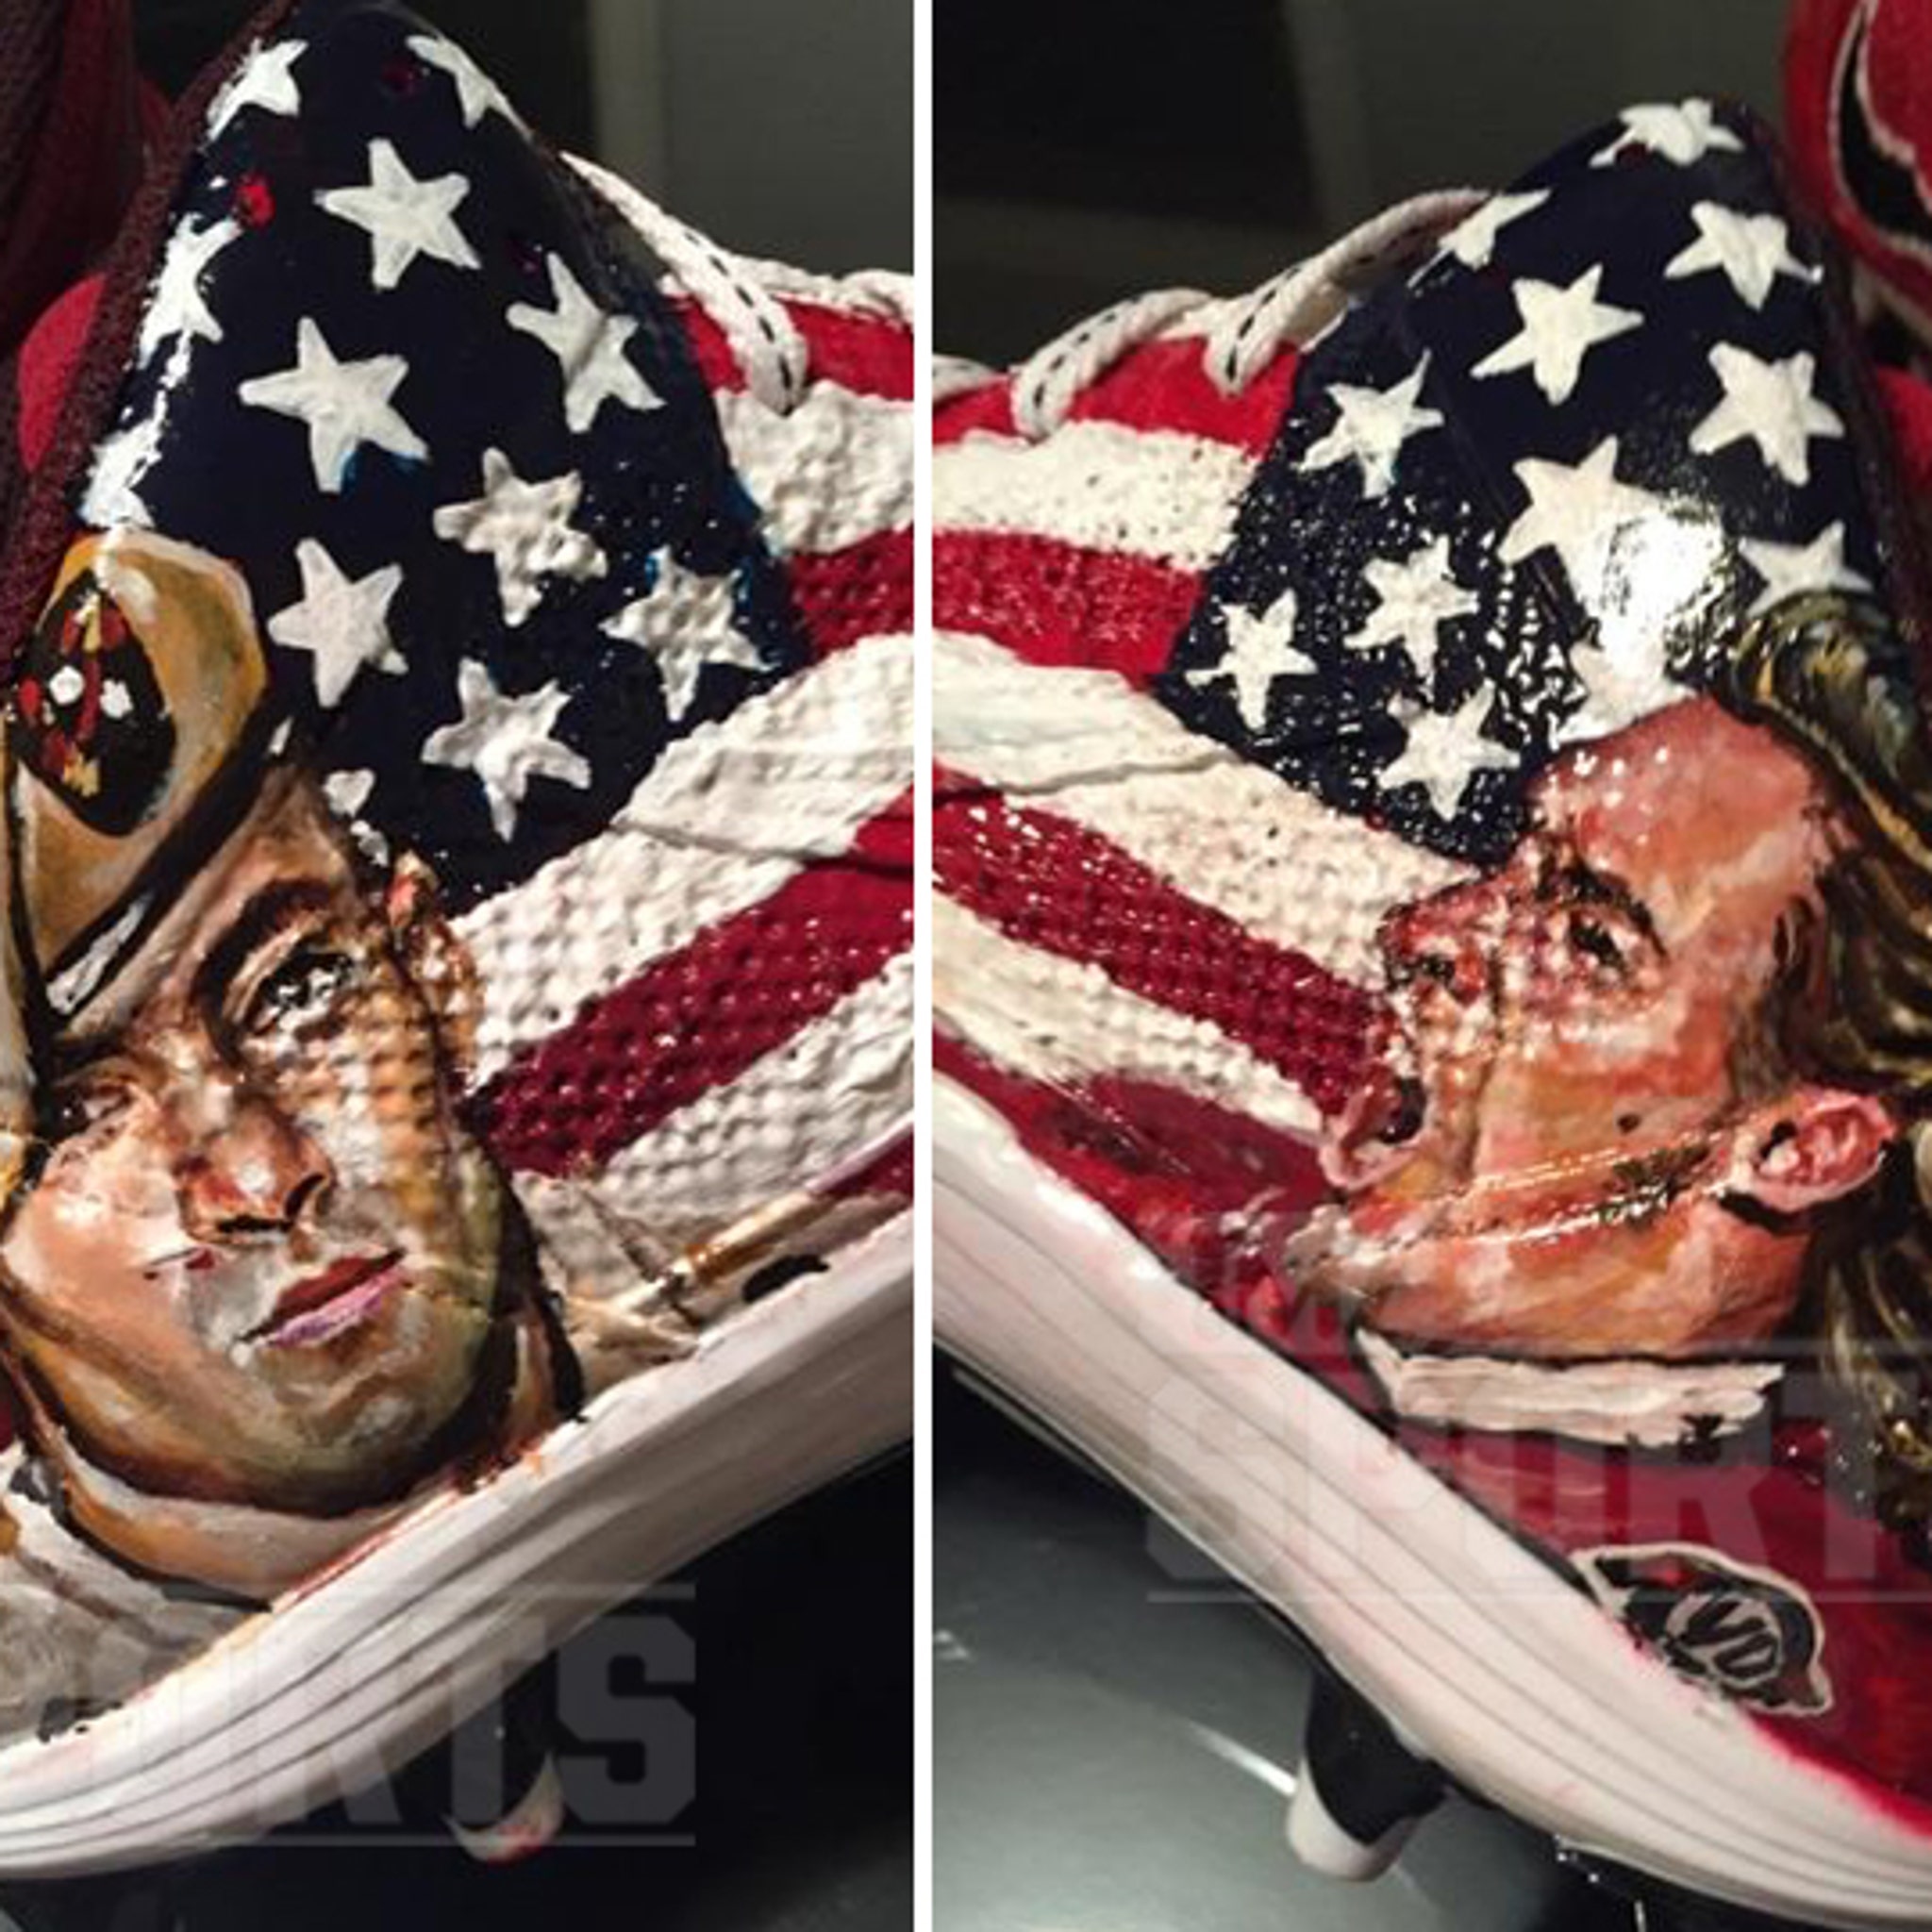 New adidas Cleats Salute Pat Tillman and the U.S. Army